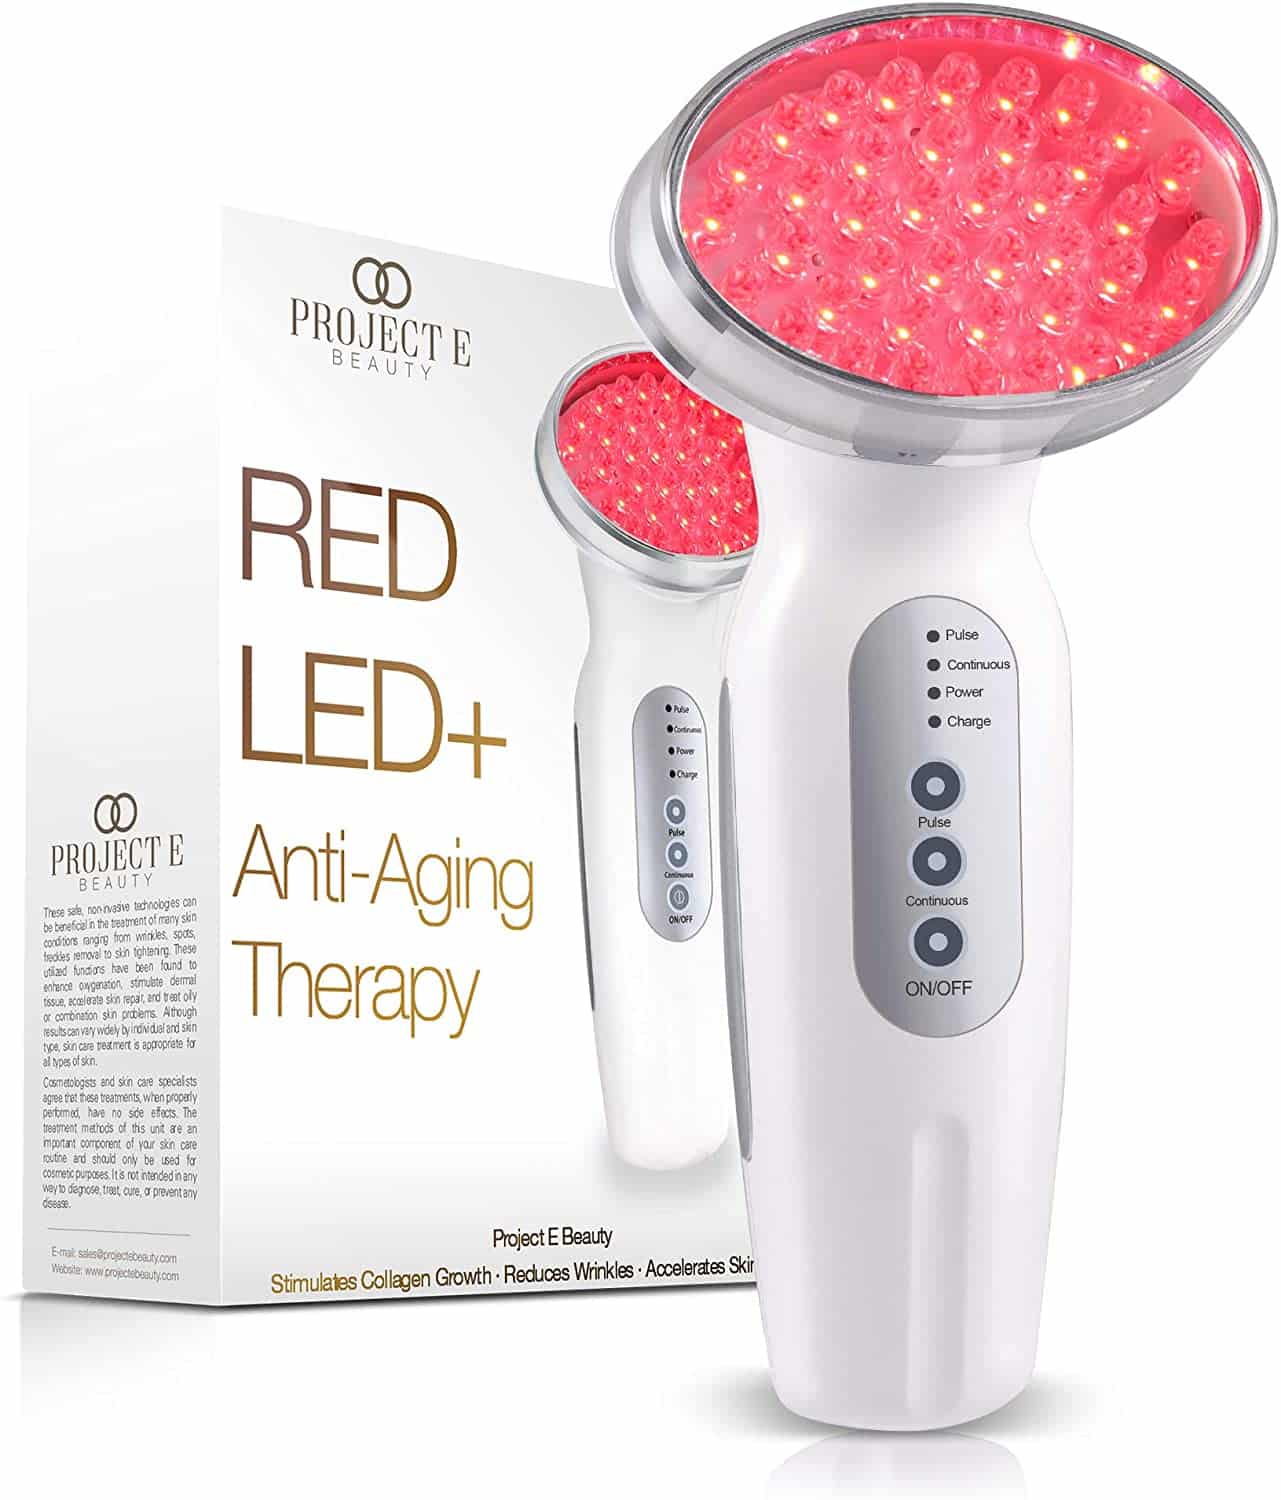 Project E Beauty RED LED+ Anti